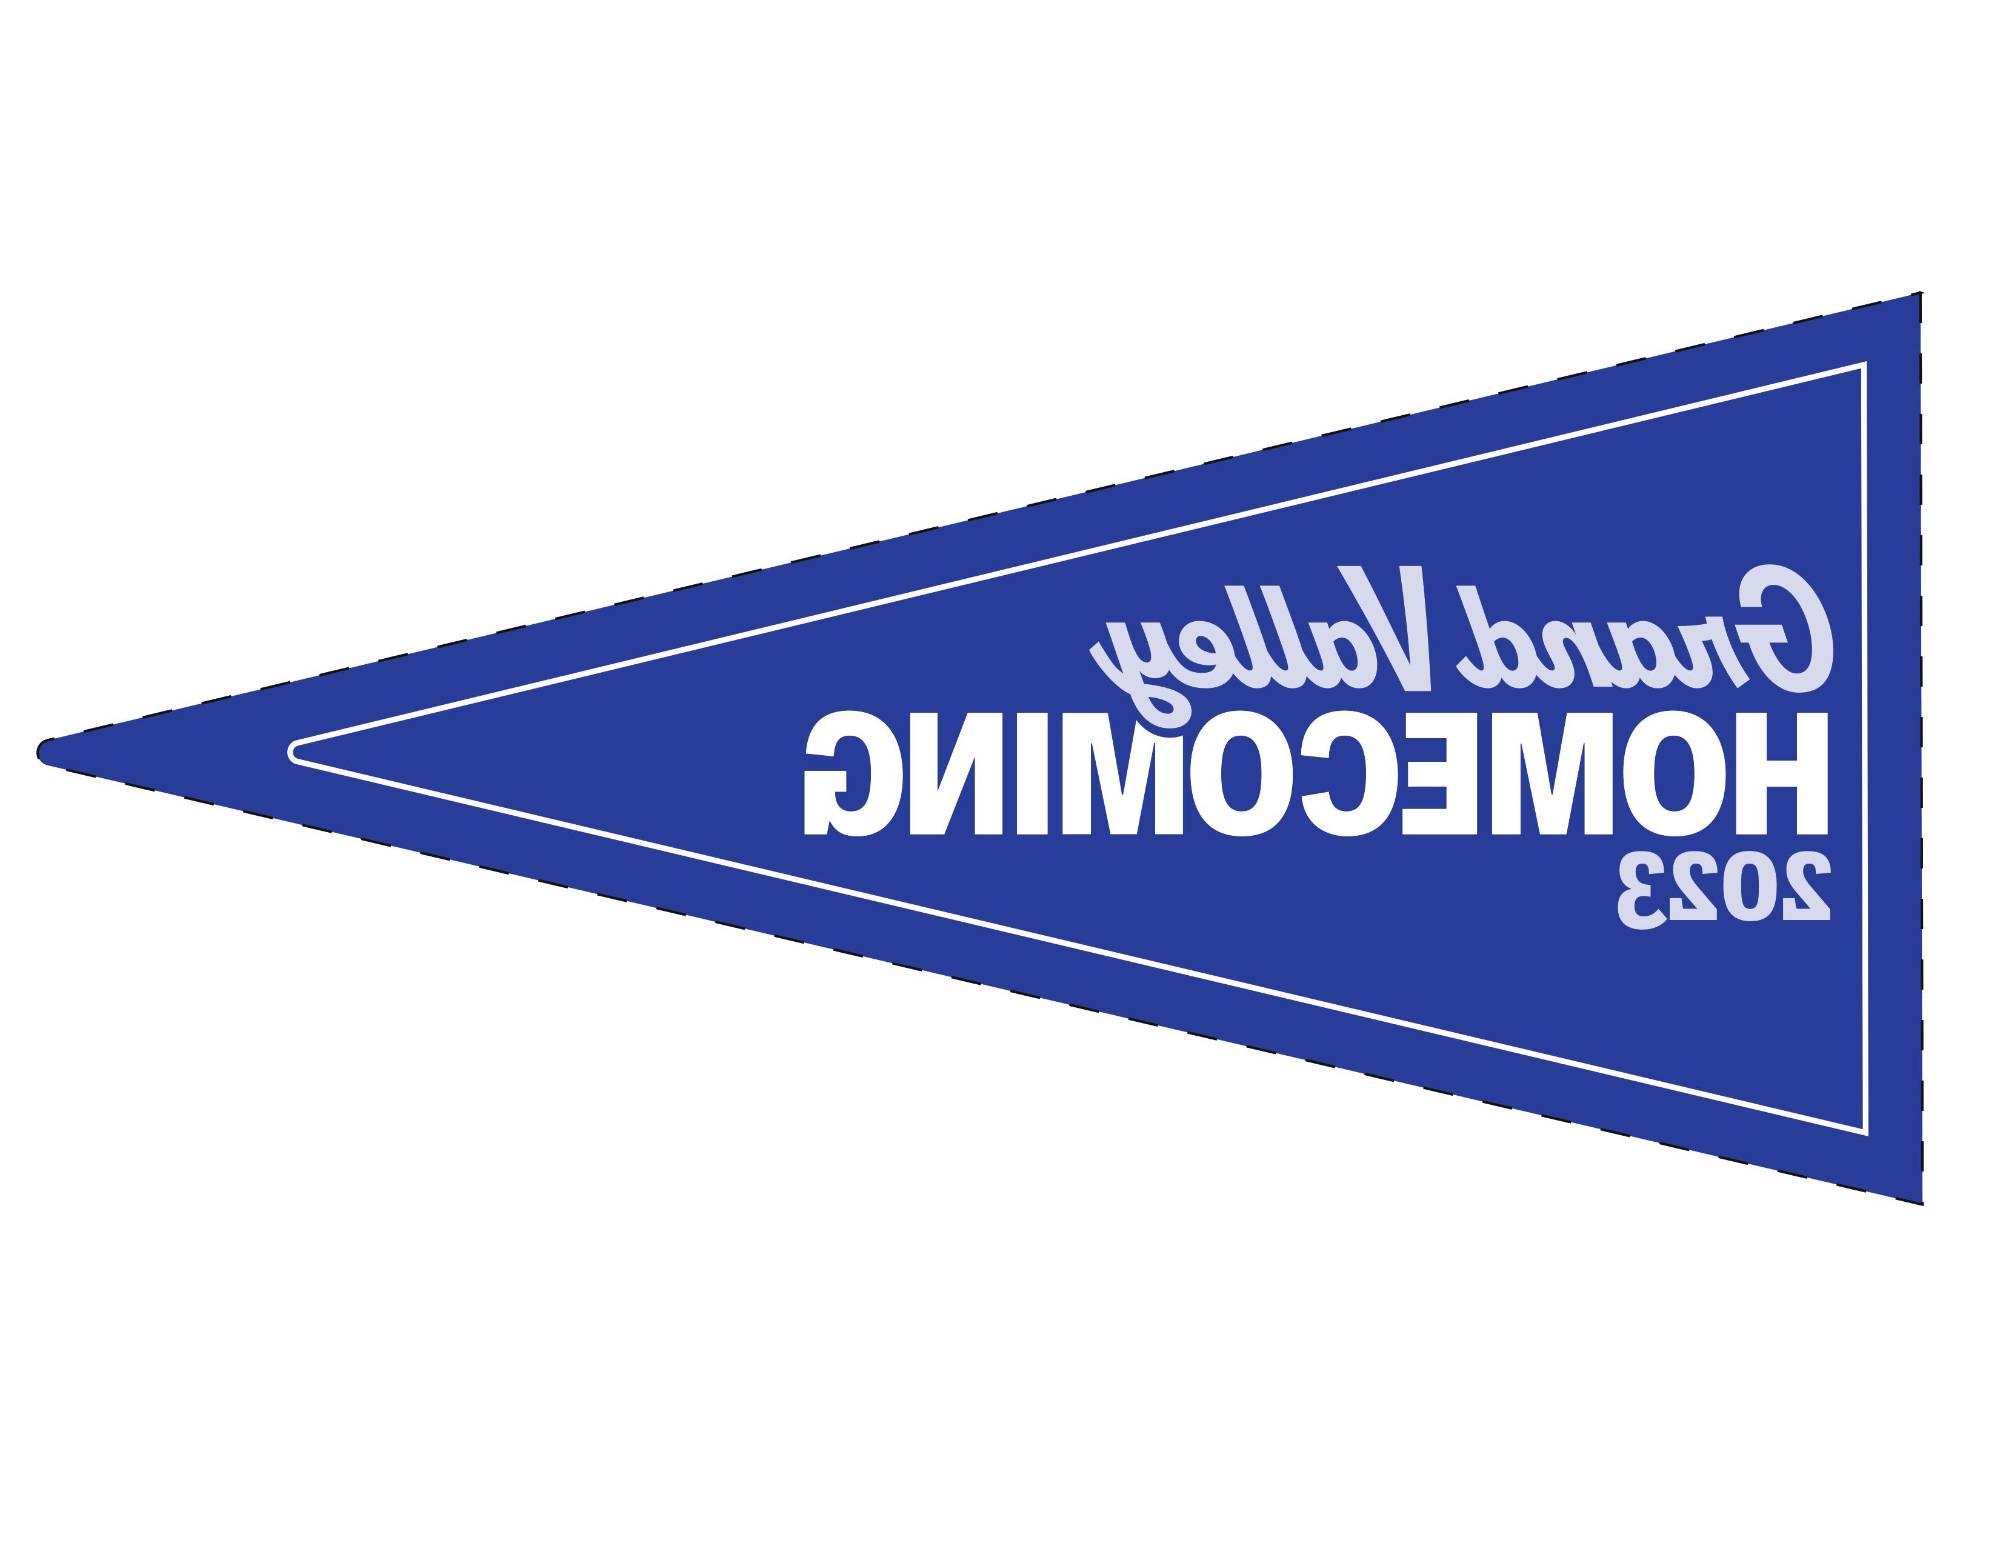 Blue Homecoming pennant